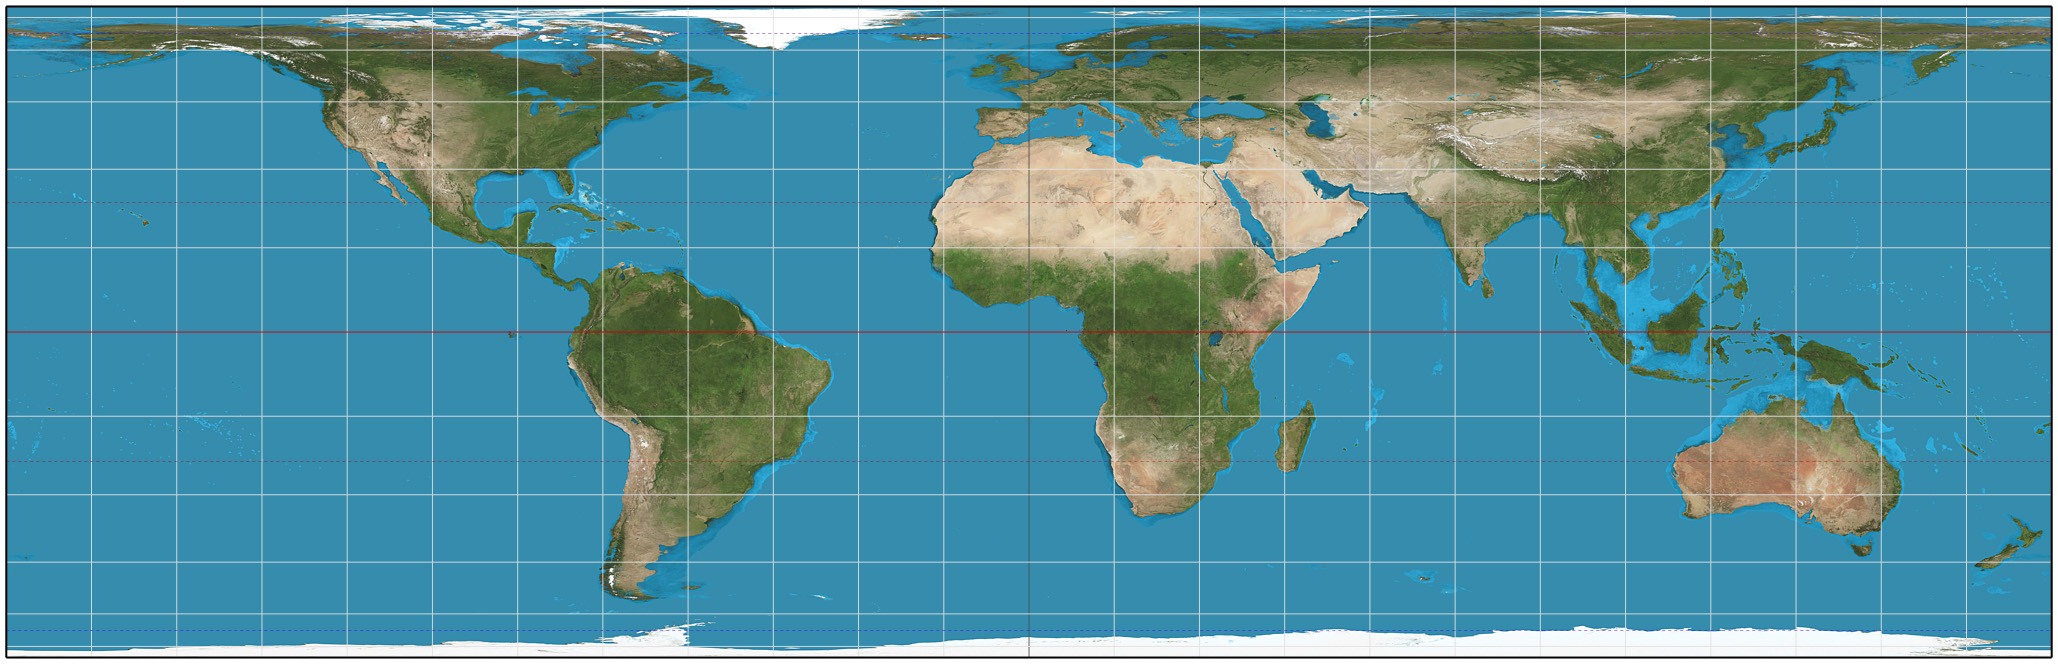 Lambert_cylindrical_equal-area_projection_SW.jpg